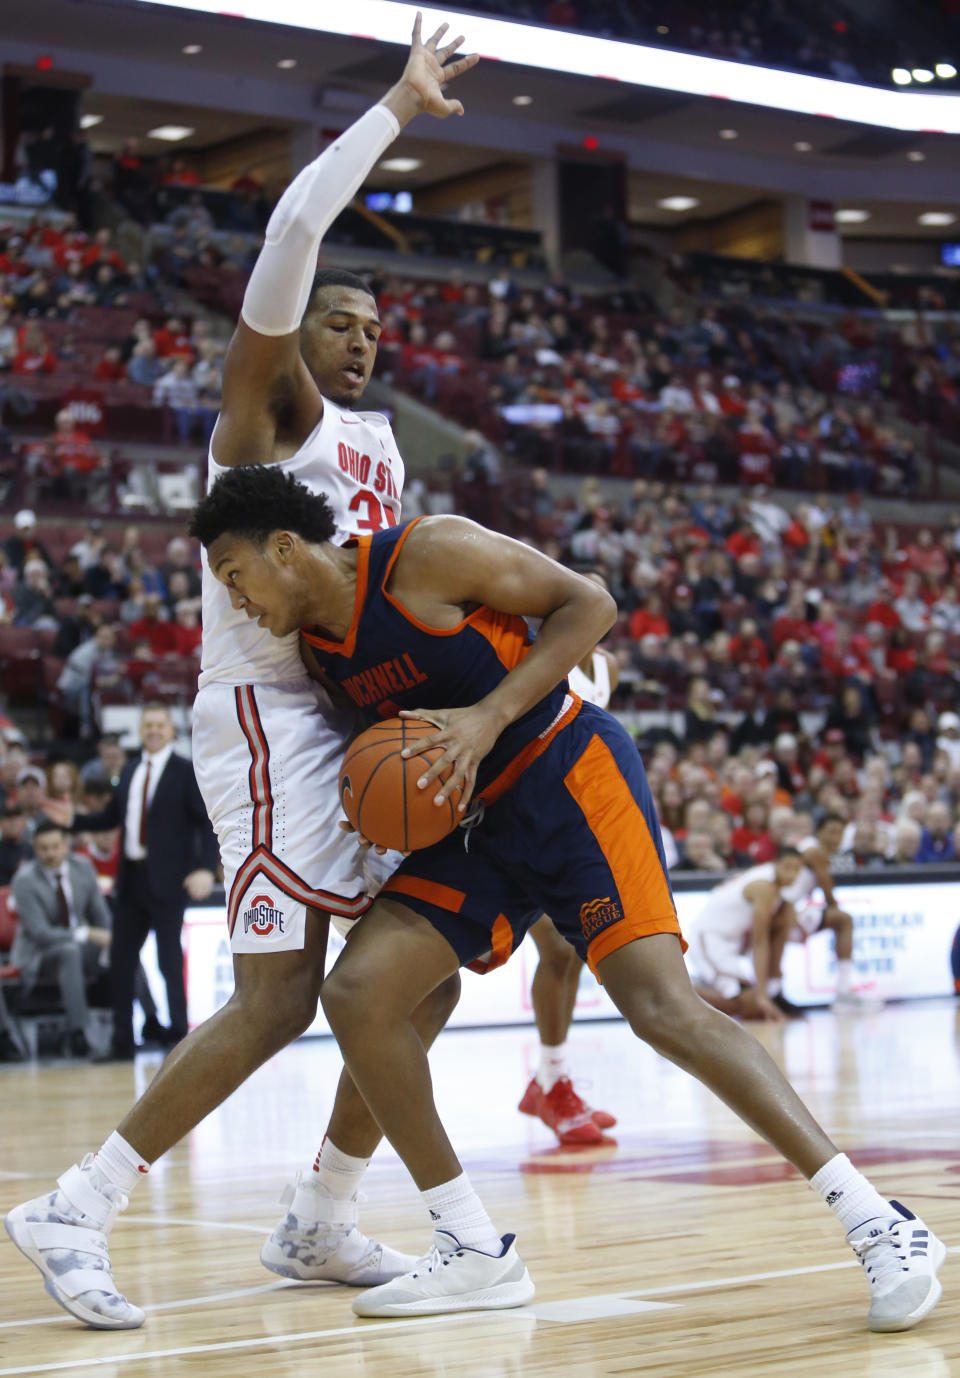 Bucknell's Paul Newman, right, posts up against Ohio State's Kaleb Wesson, left, during the first half of an NCAA college basketball game Saturday, Dec. 15, 2018, in Columbus, Ohio. (AP Photo/Jay LaPrete)